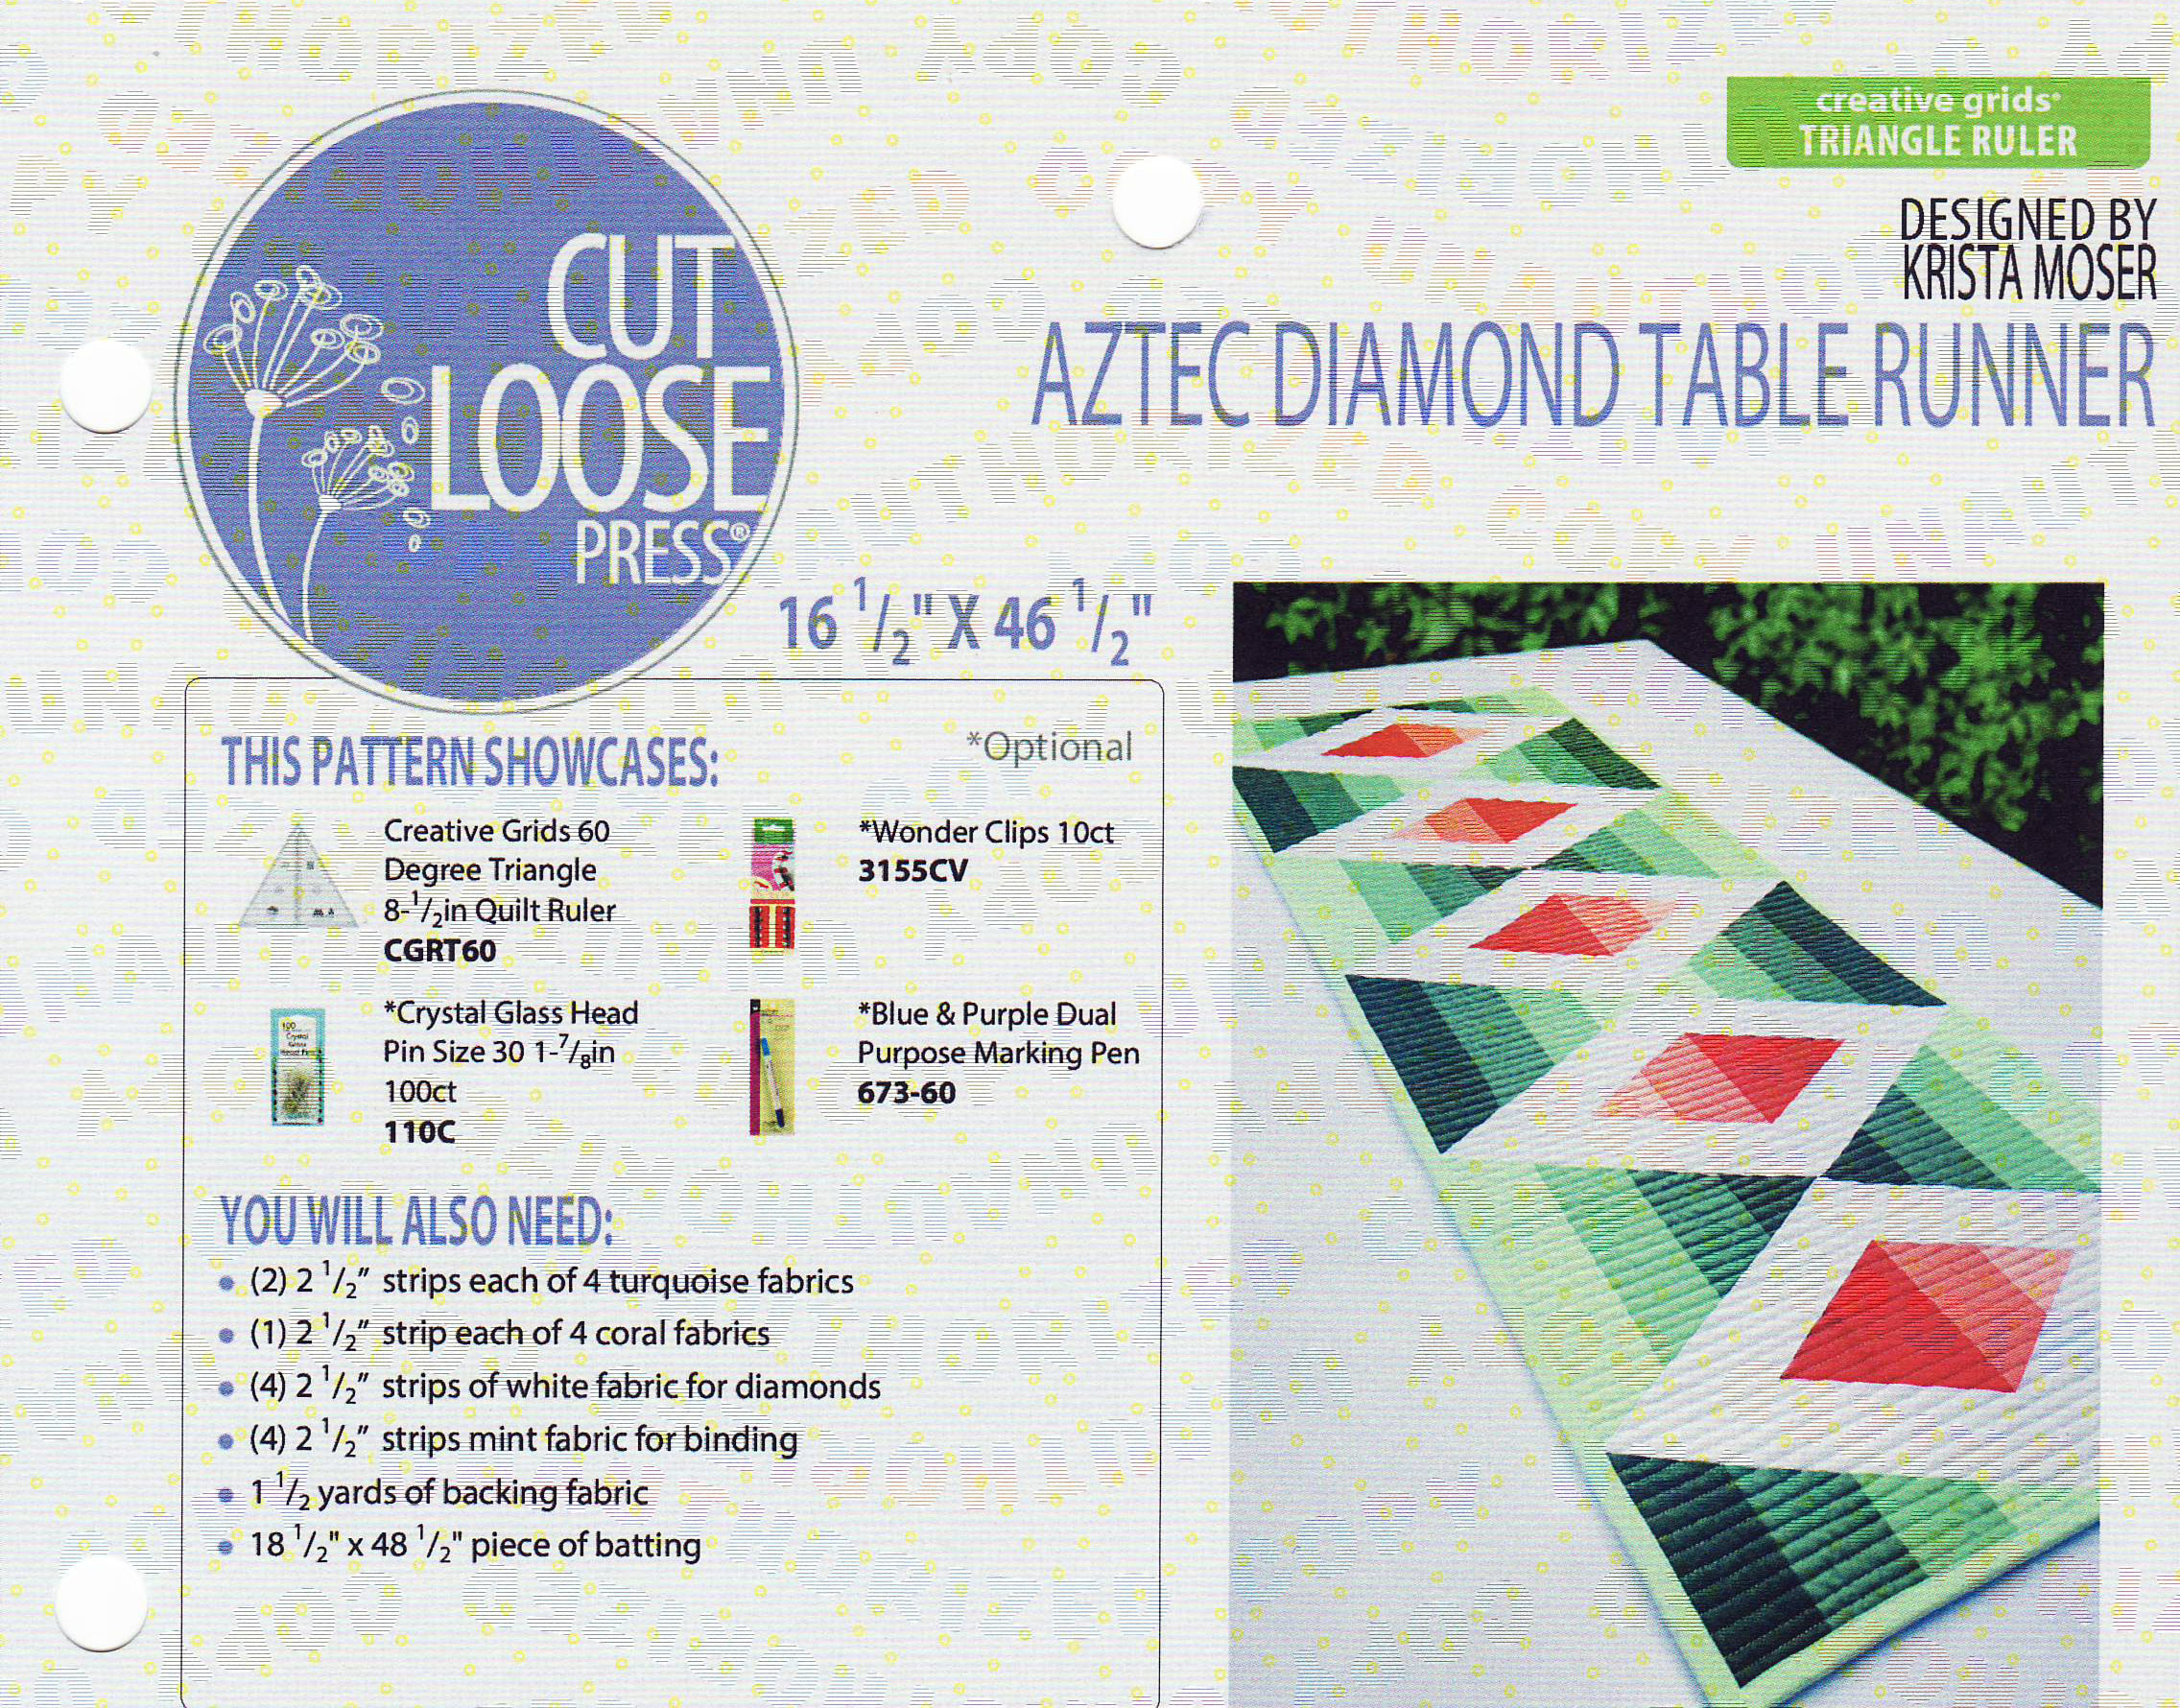 Aztec-Diamond-Table-runner-sewing-pattern-front